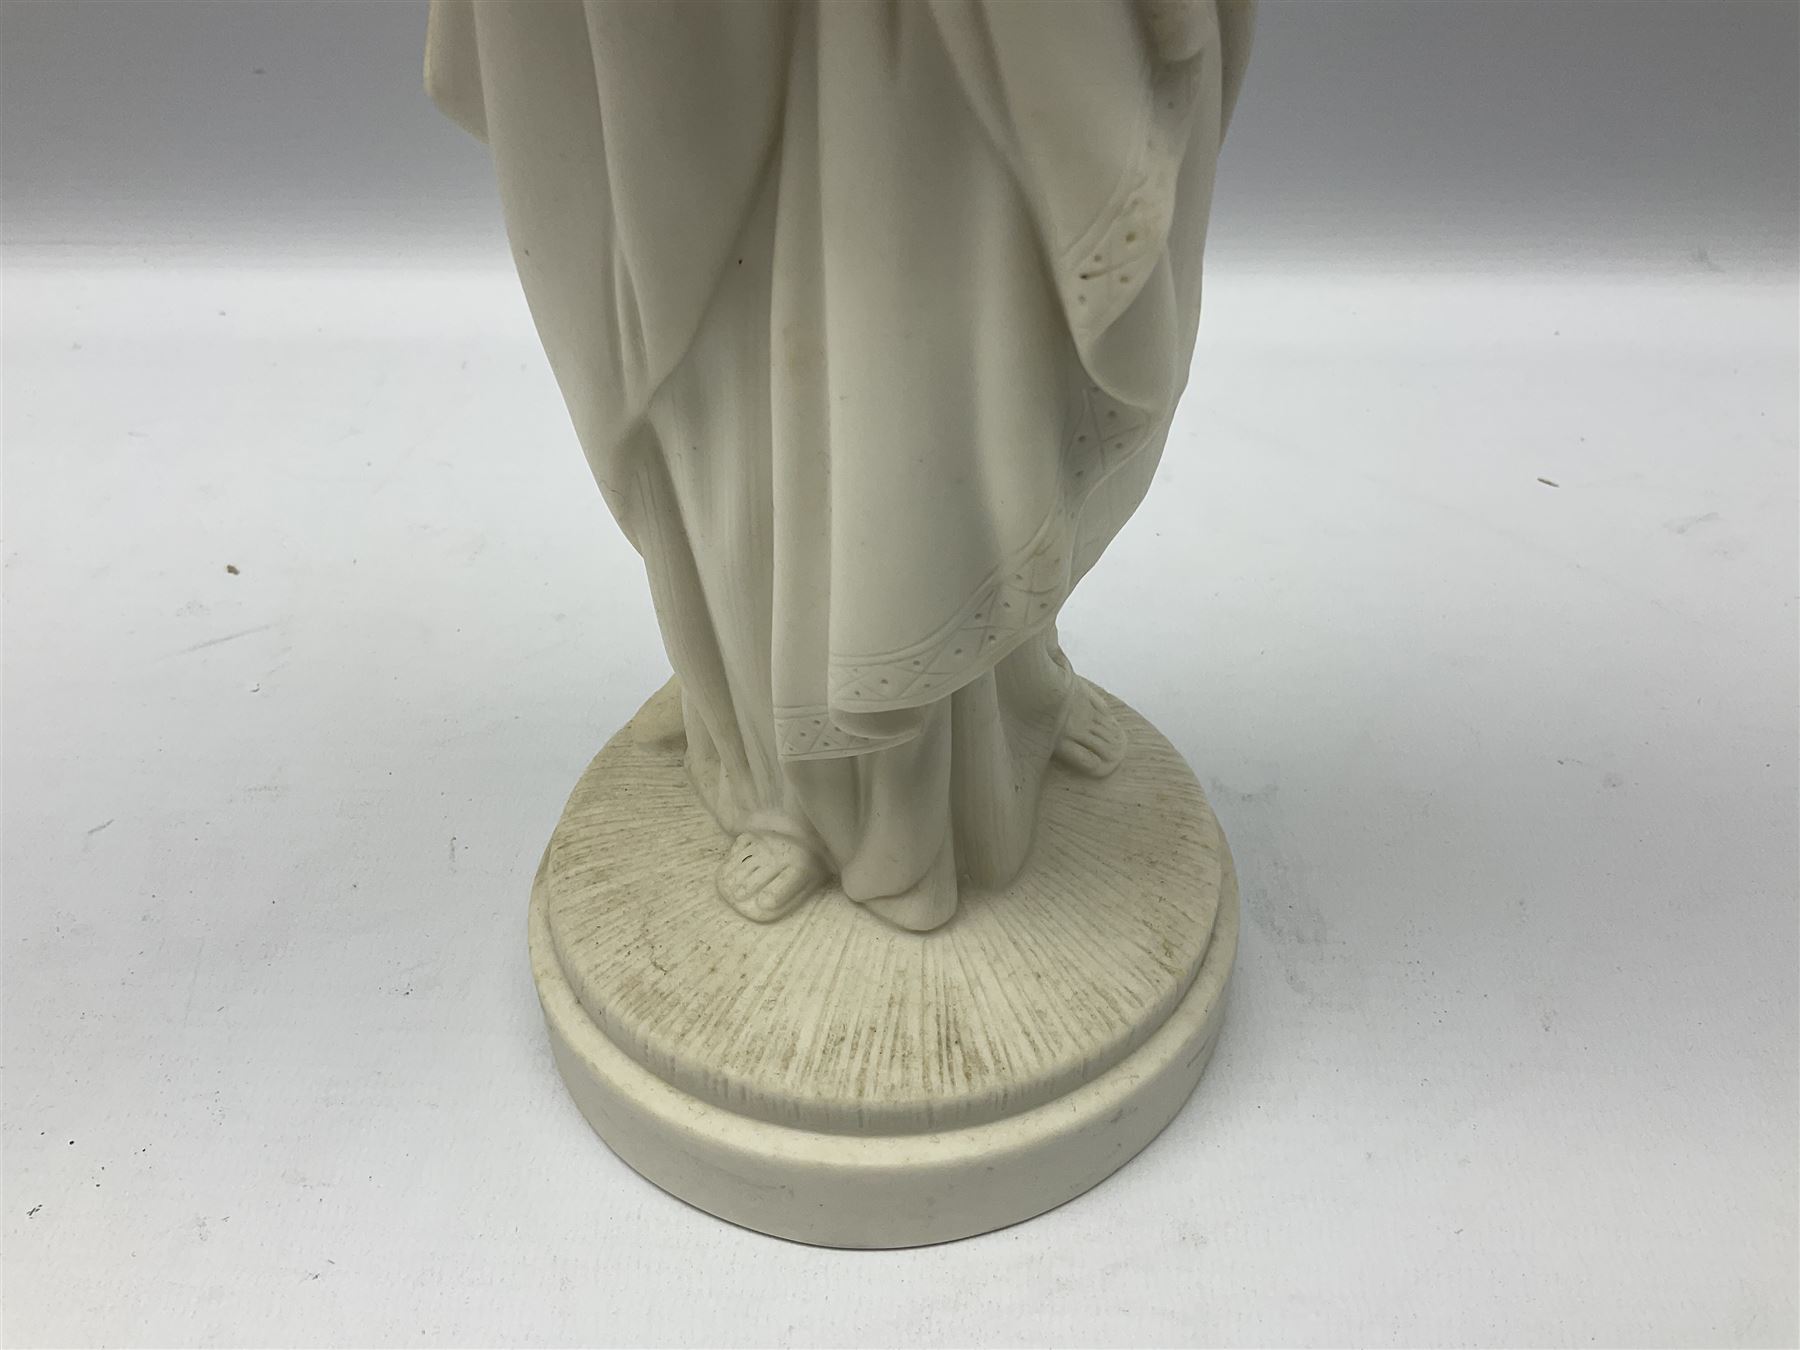 Parian ware figure of a woman in classical dress with one hand raised - Image 4 of 8